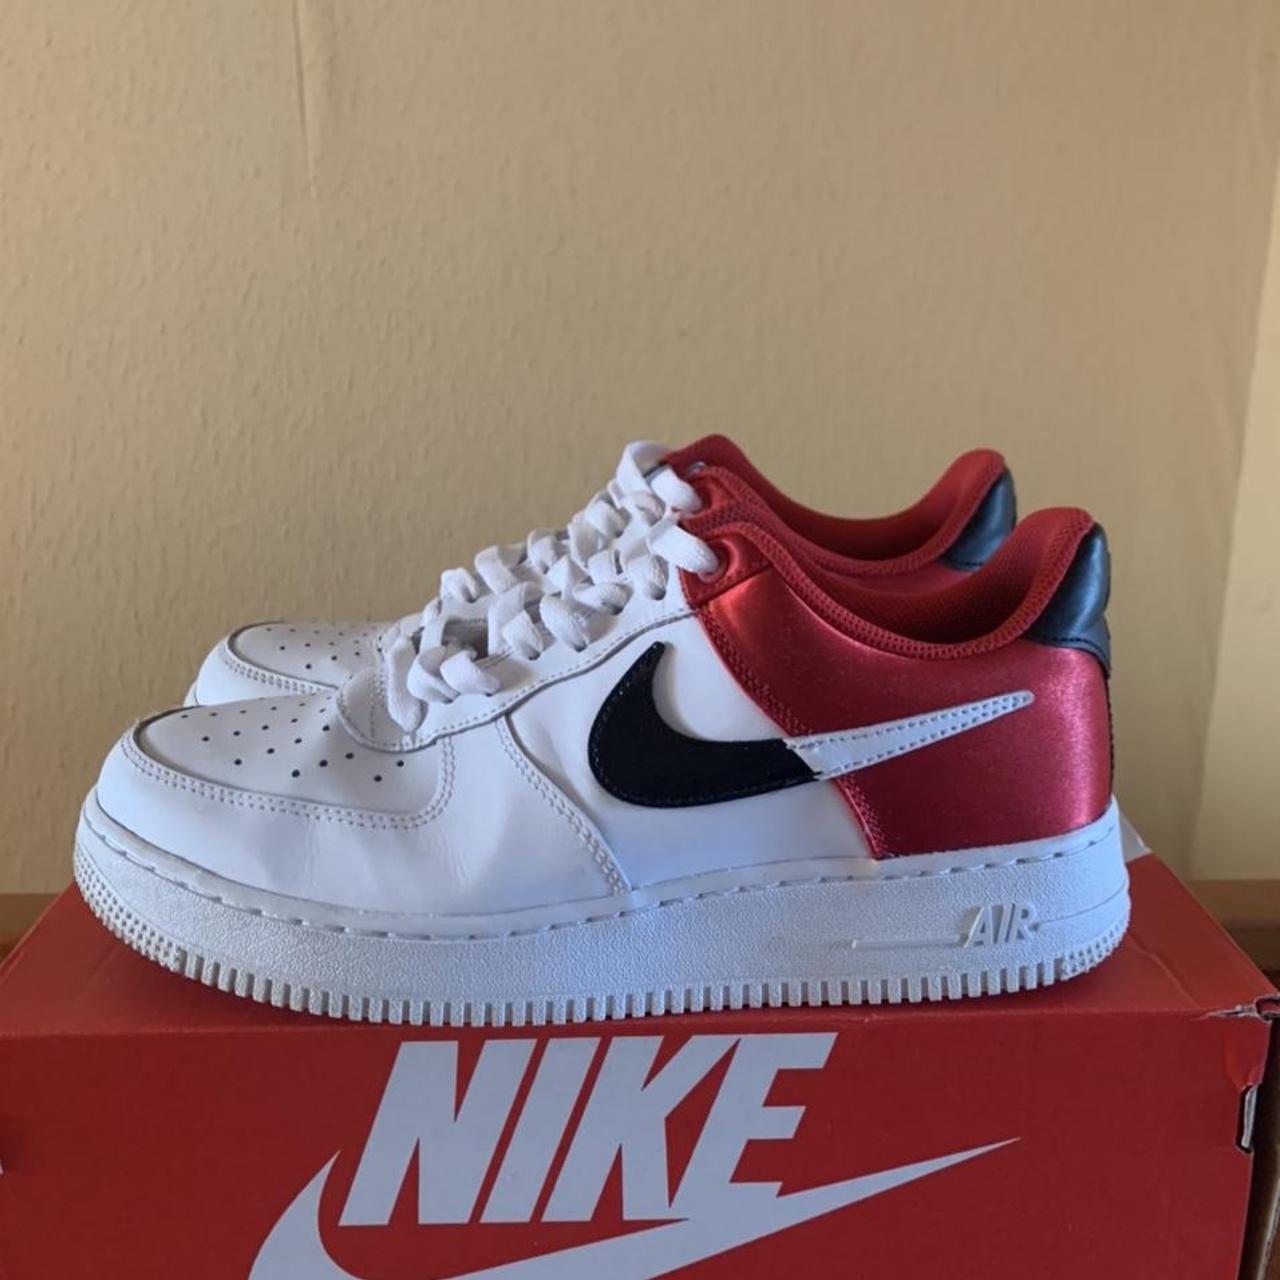 NBA X AIR FORCE 1 '07 LV8 'RED' ♥️ THESE ARE SO - Depop